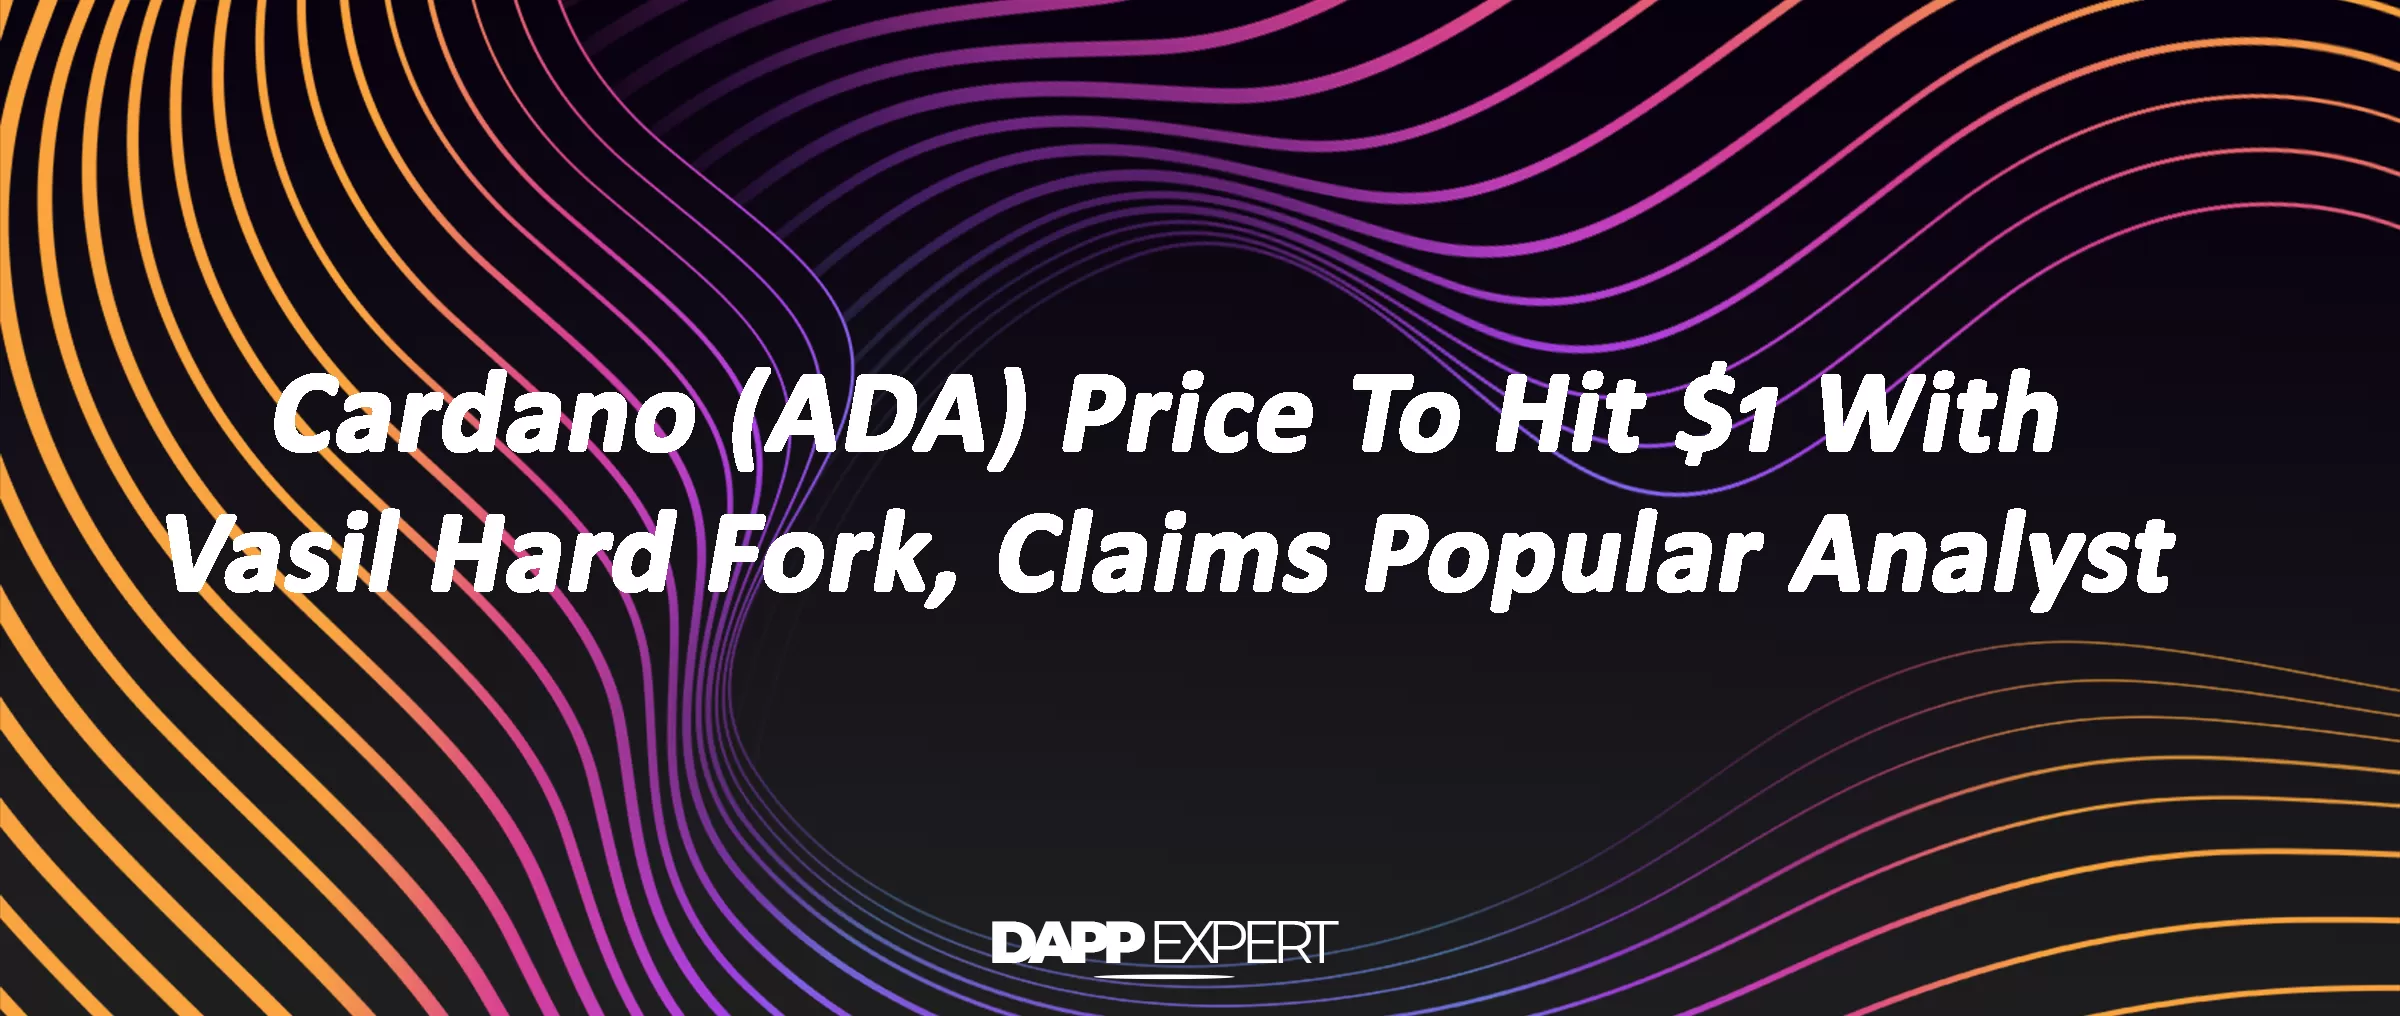 Cardano (ADA) Price To Hit $1 With Vasil Hard Fork, Claims Popular Analyst